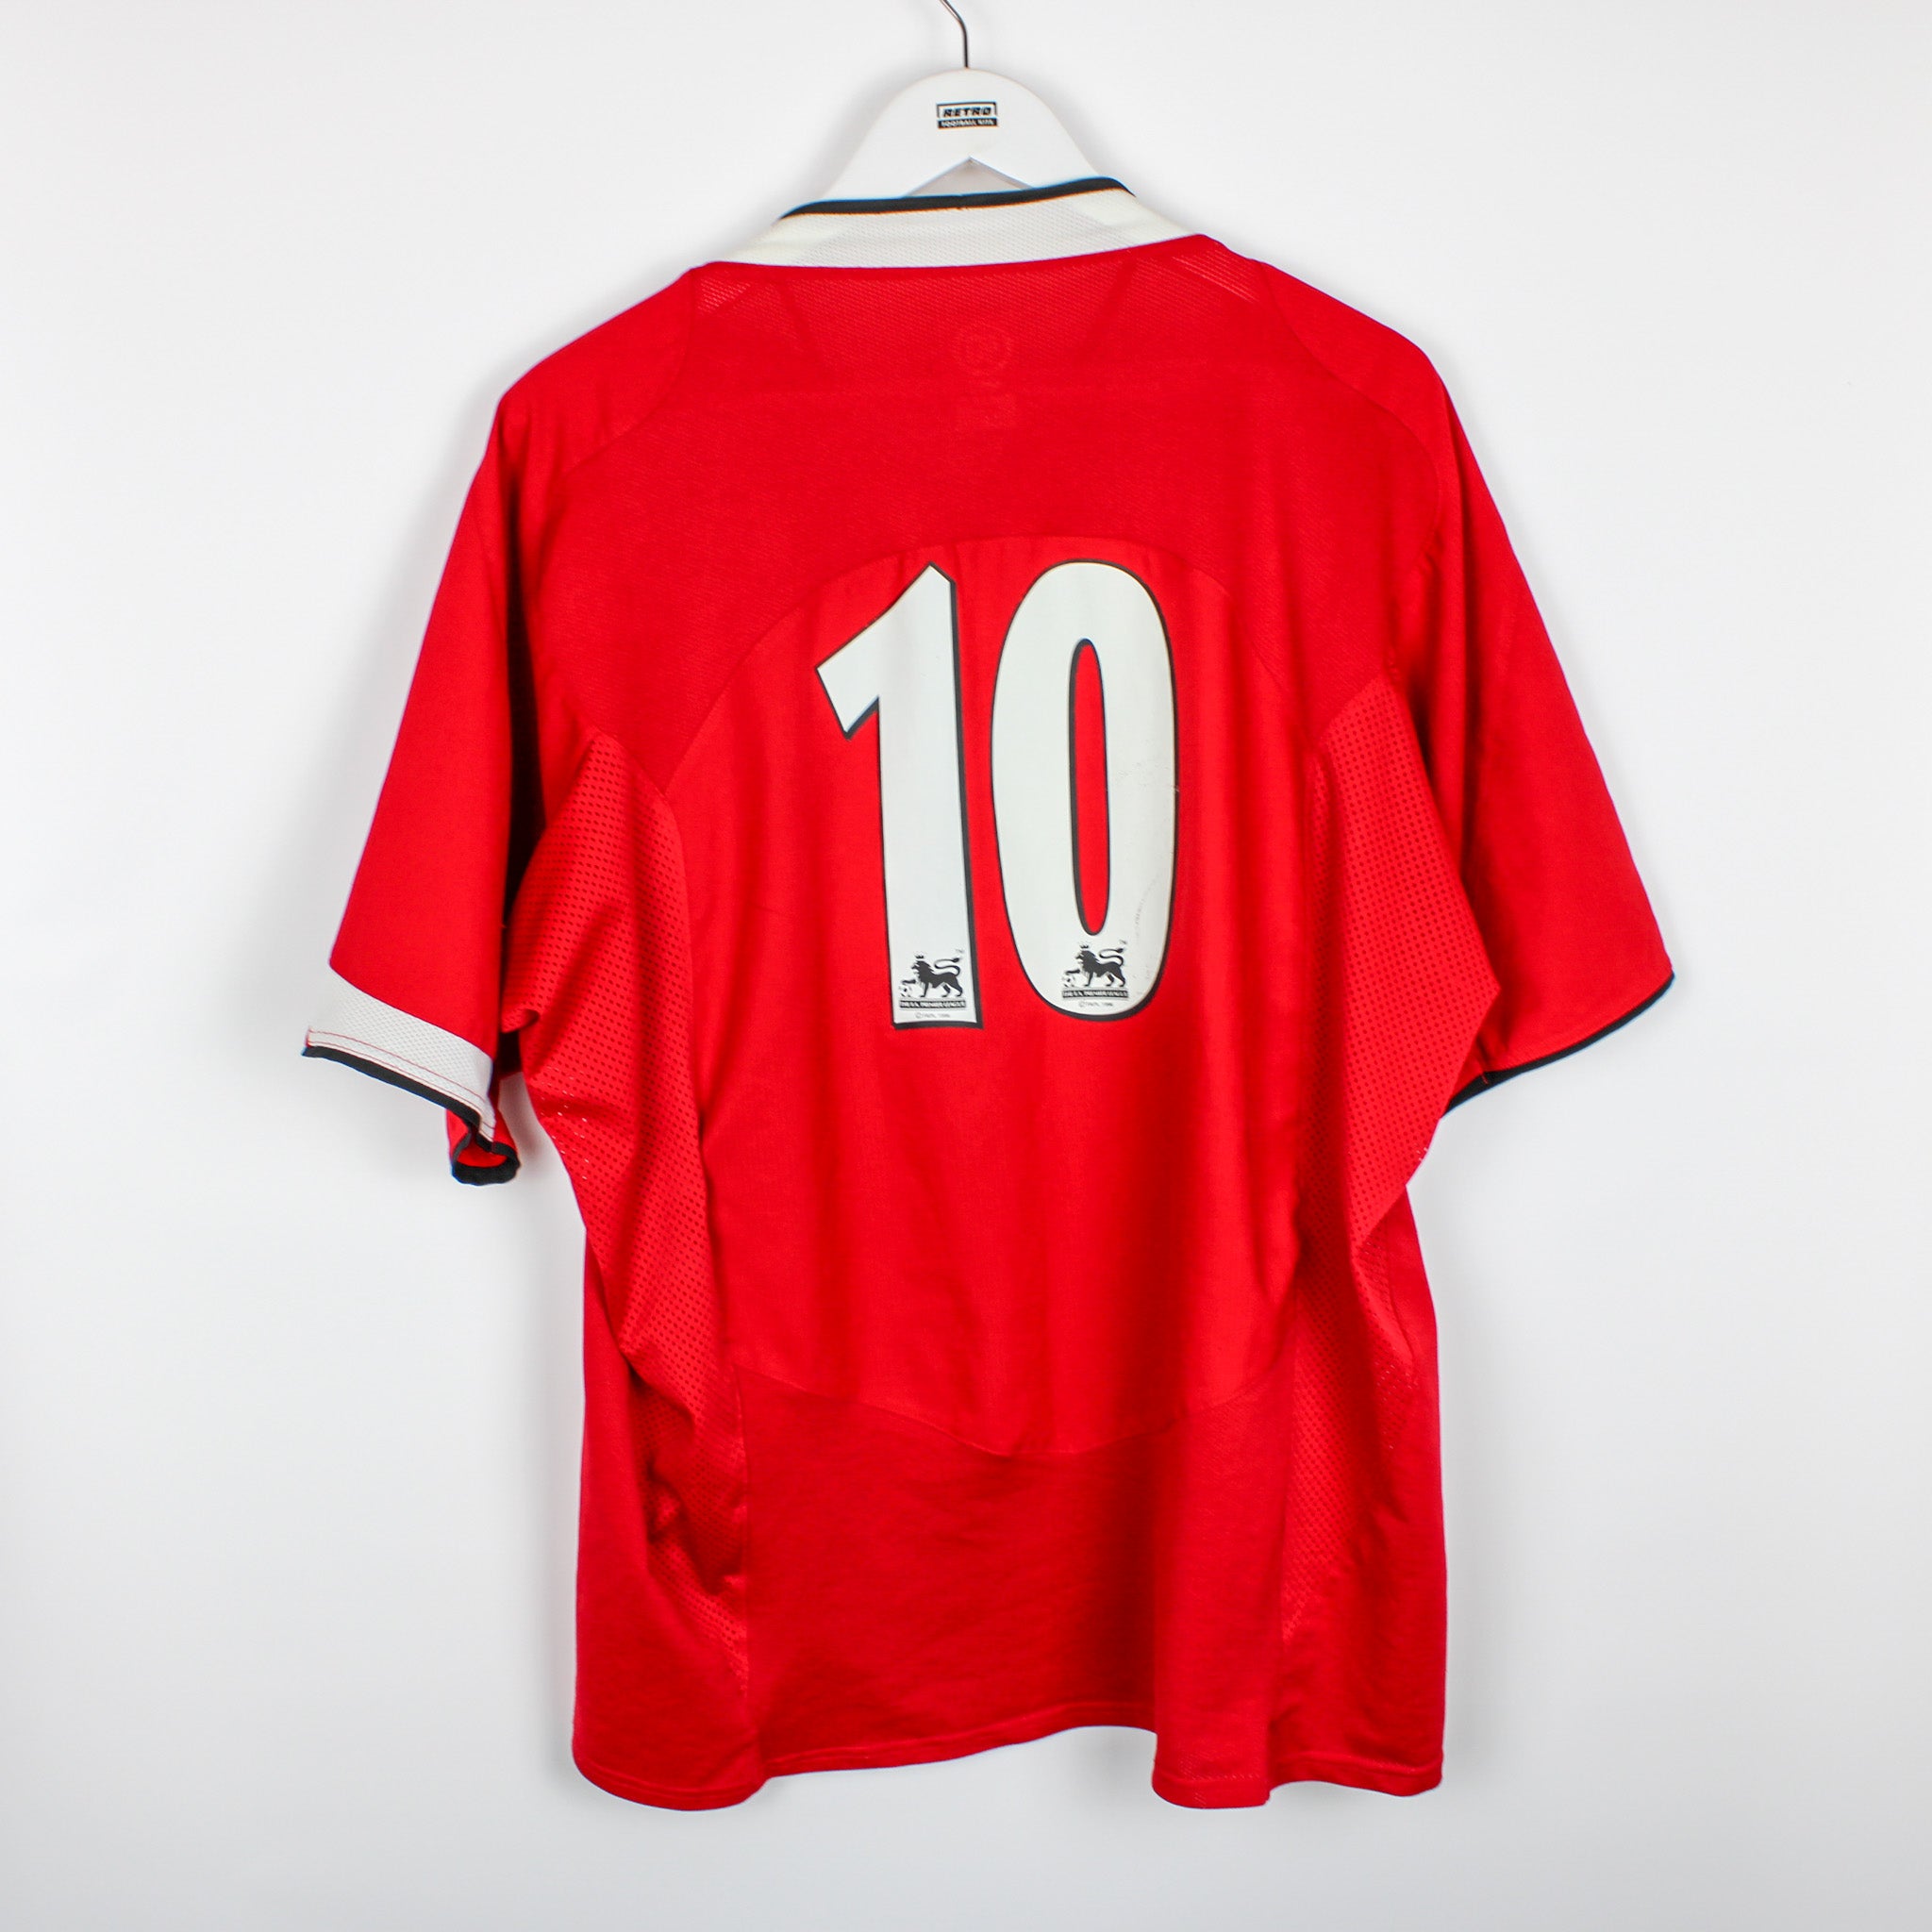 Sky Manchester United Retro Home Football Jersey 2005-06